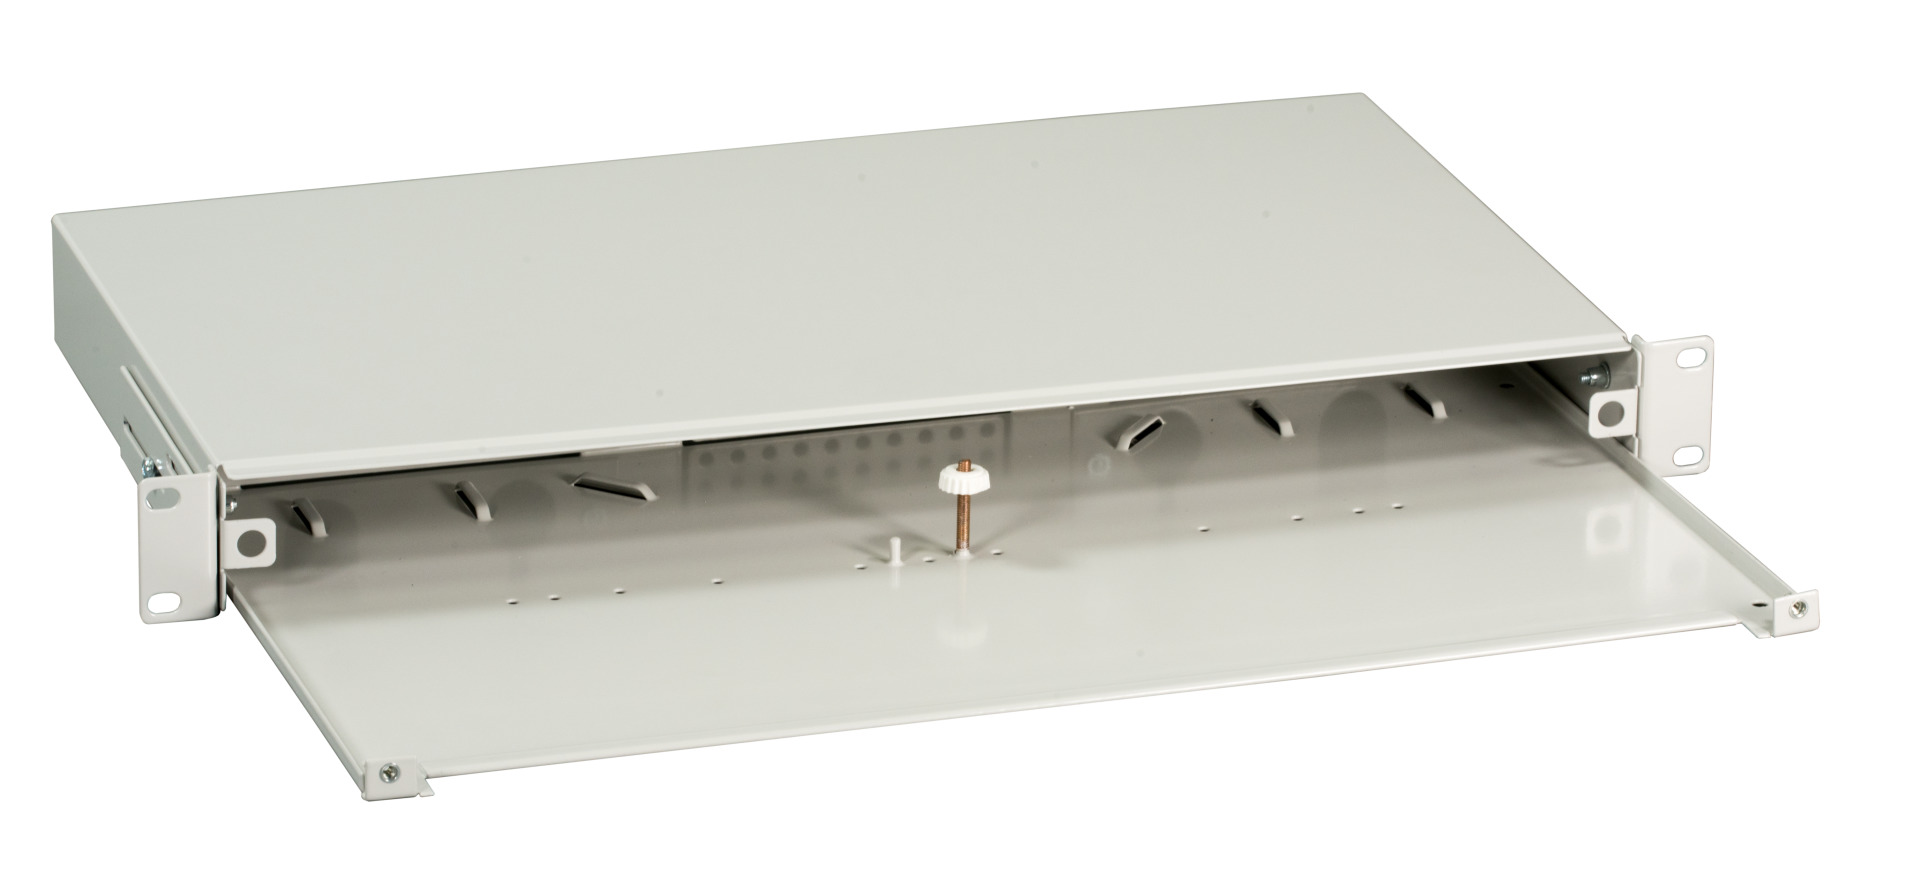 Splice box sliding version 1U without front panel, unequipped, grey